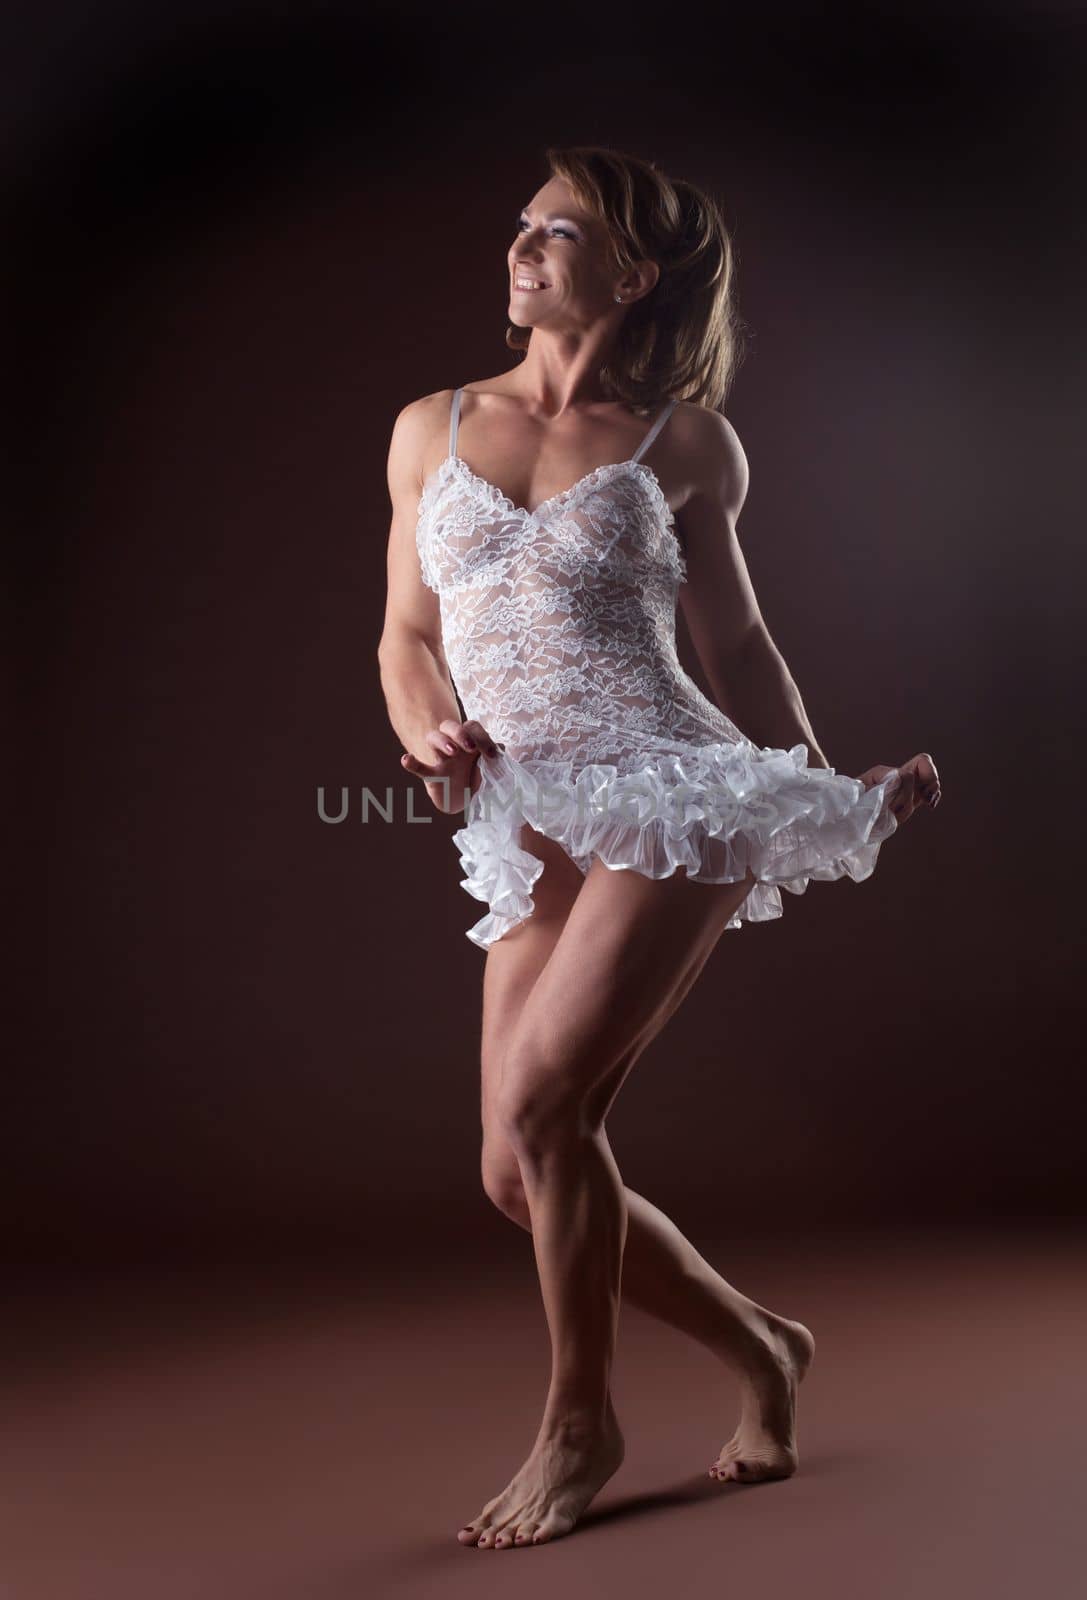 Athletic woman like body builder posing in white ballet cloth